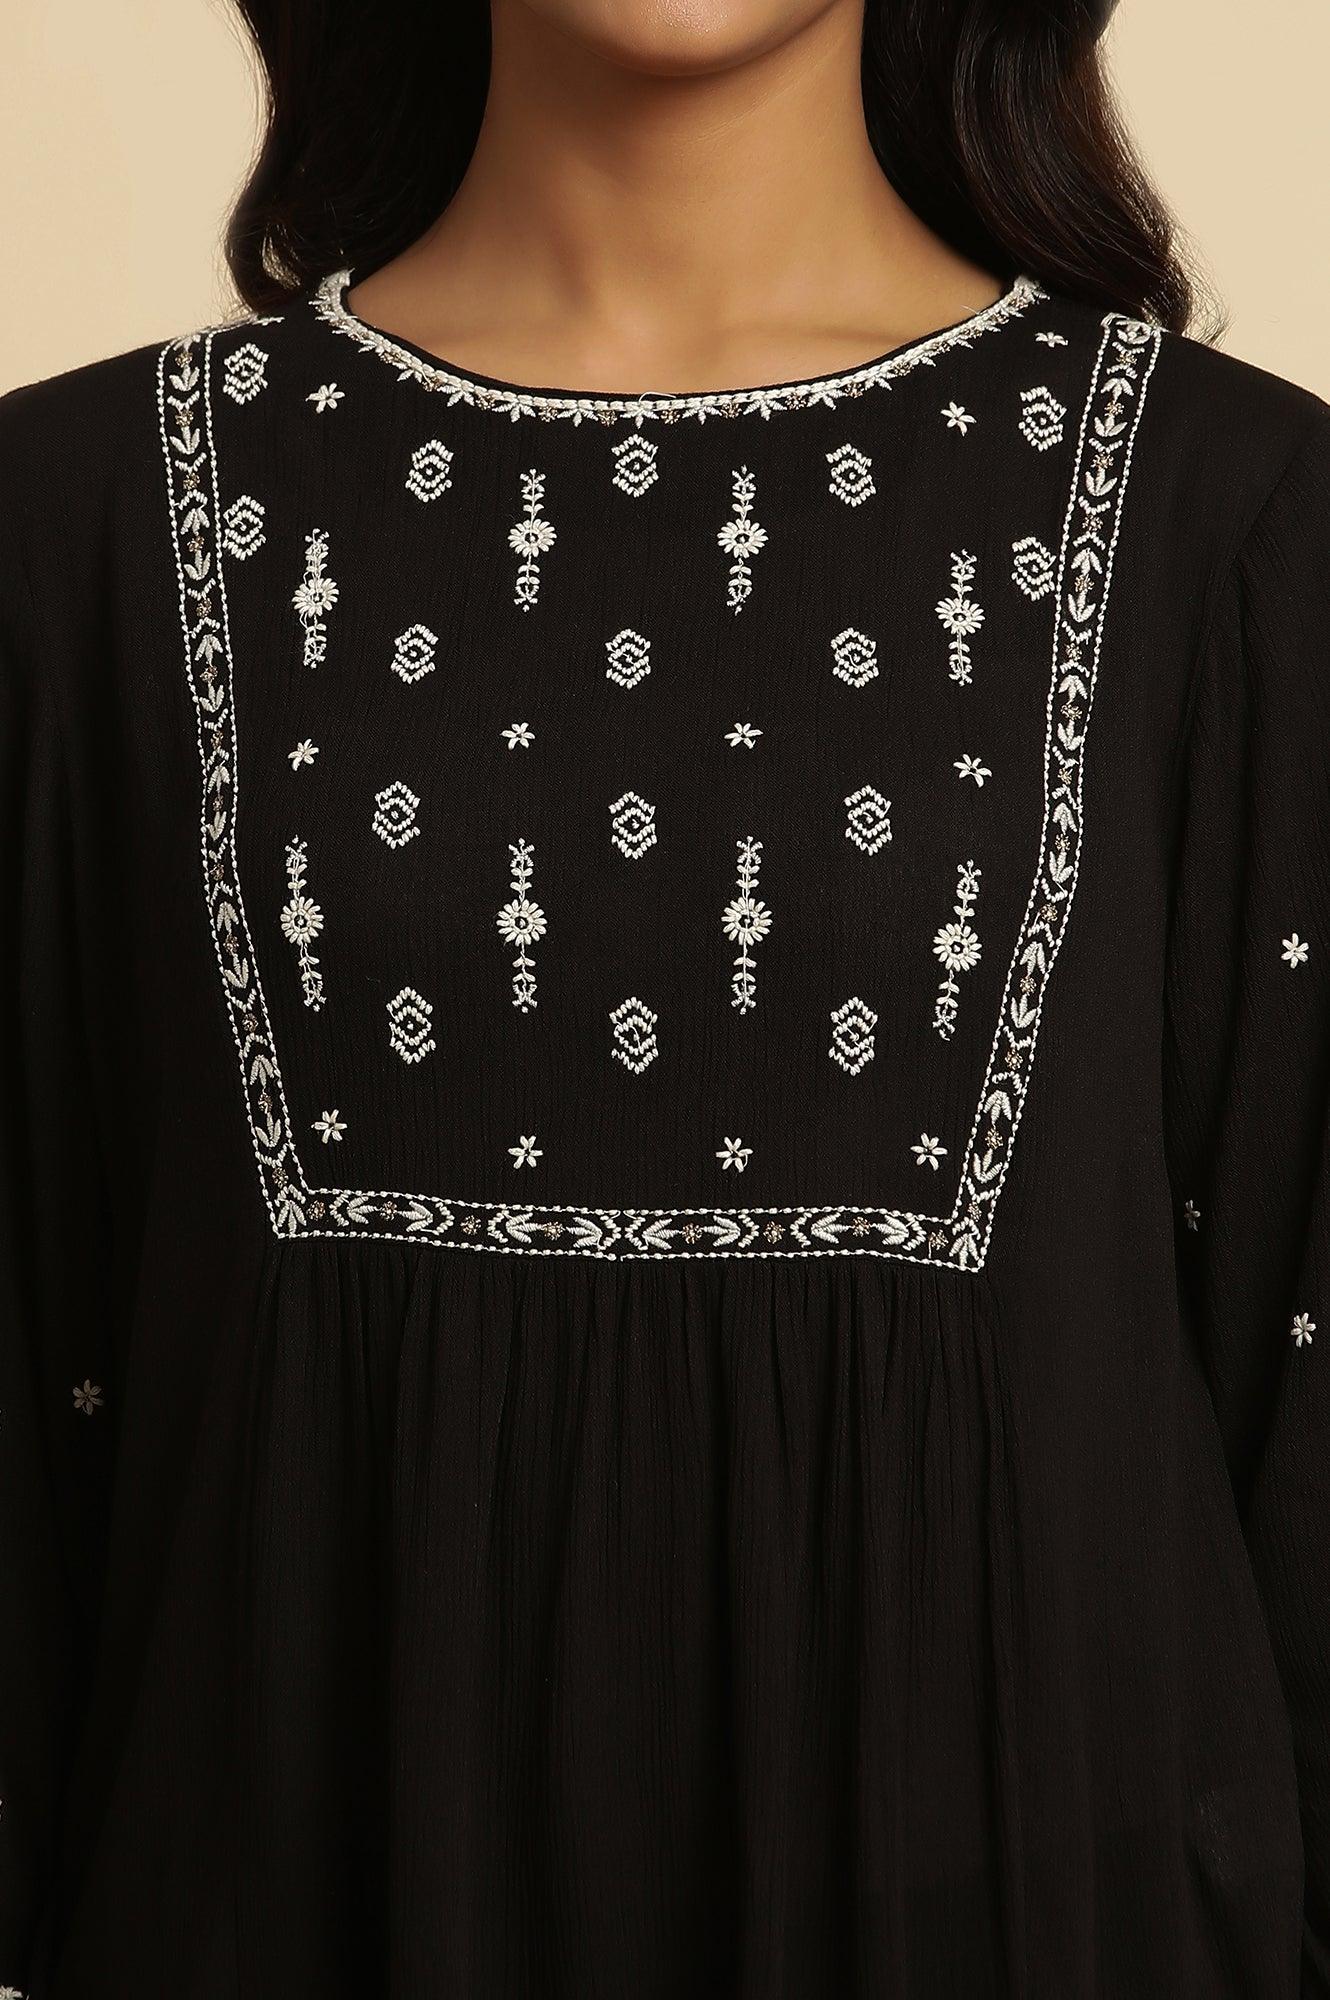 Black Top With Ivory Embroidered Yoke - wforwoman